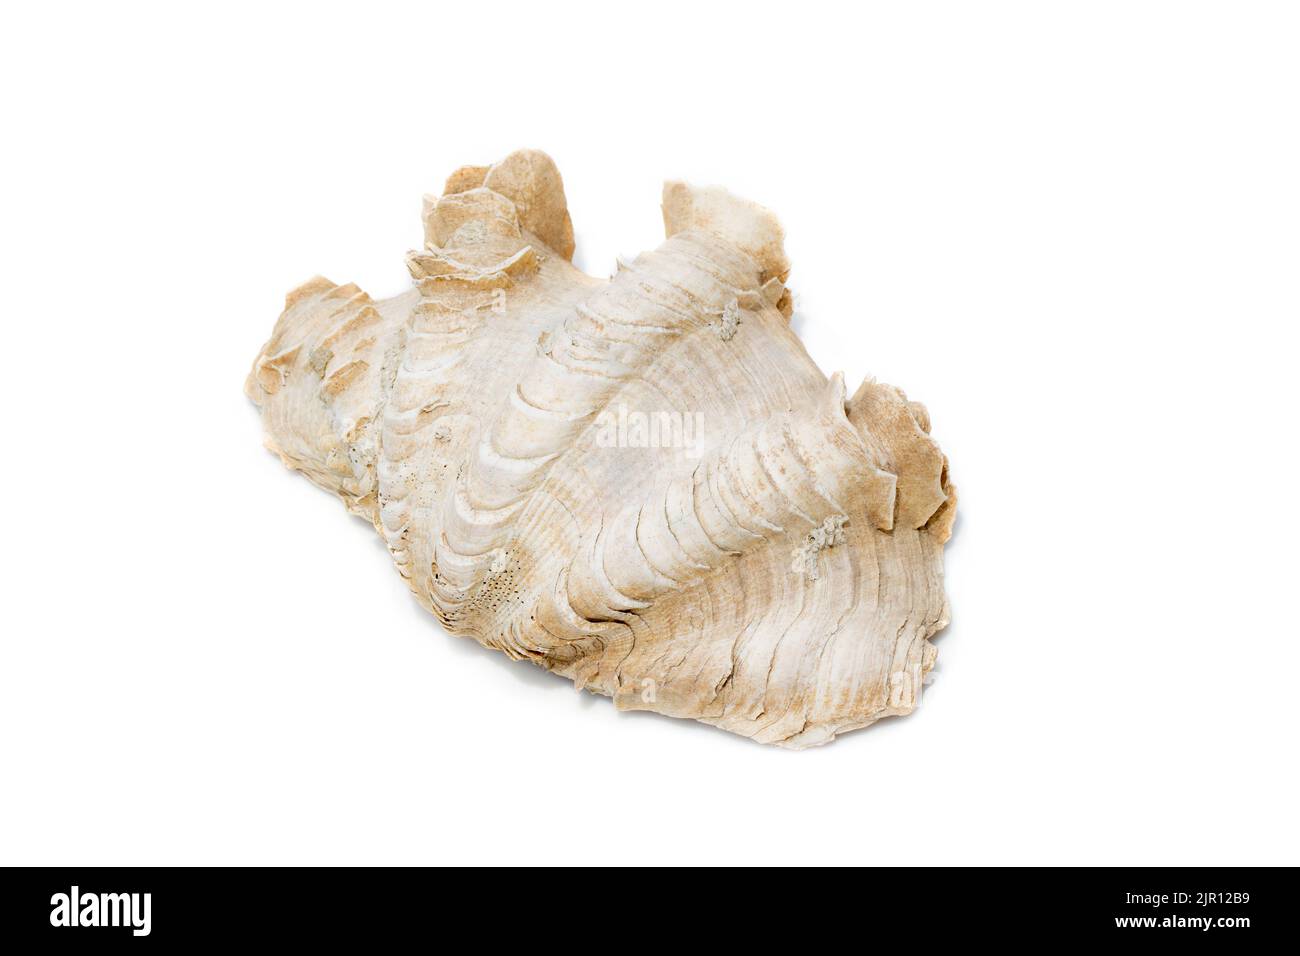 Image of Crocus Giant Clam (Tridacna crocea). on a white background. Sea shells. Undersea Animals. Stock Photo